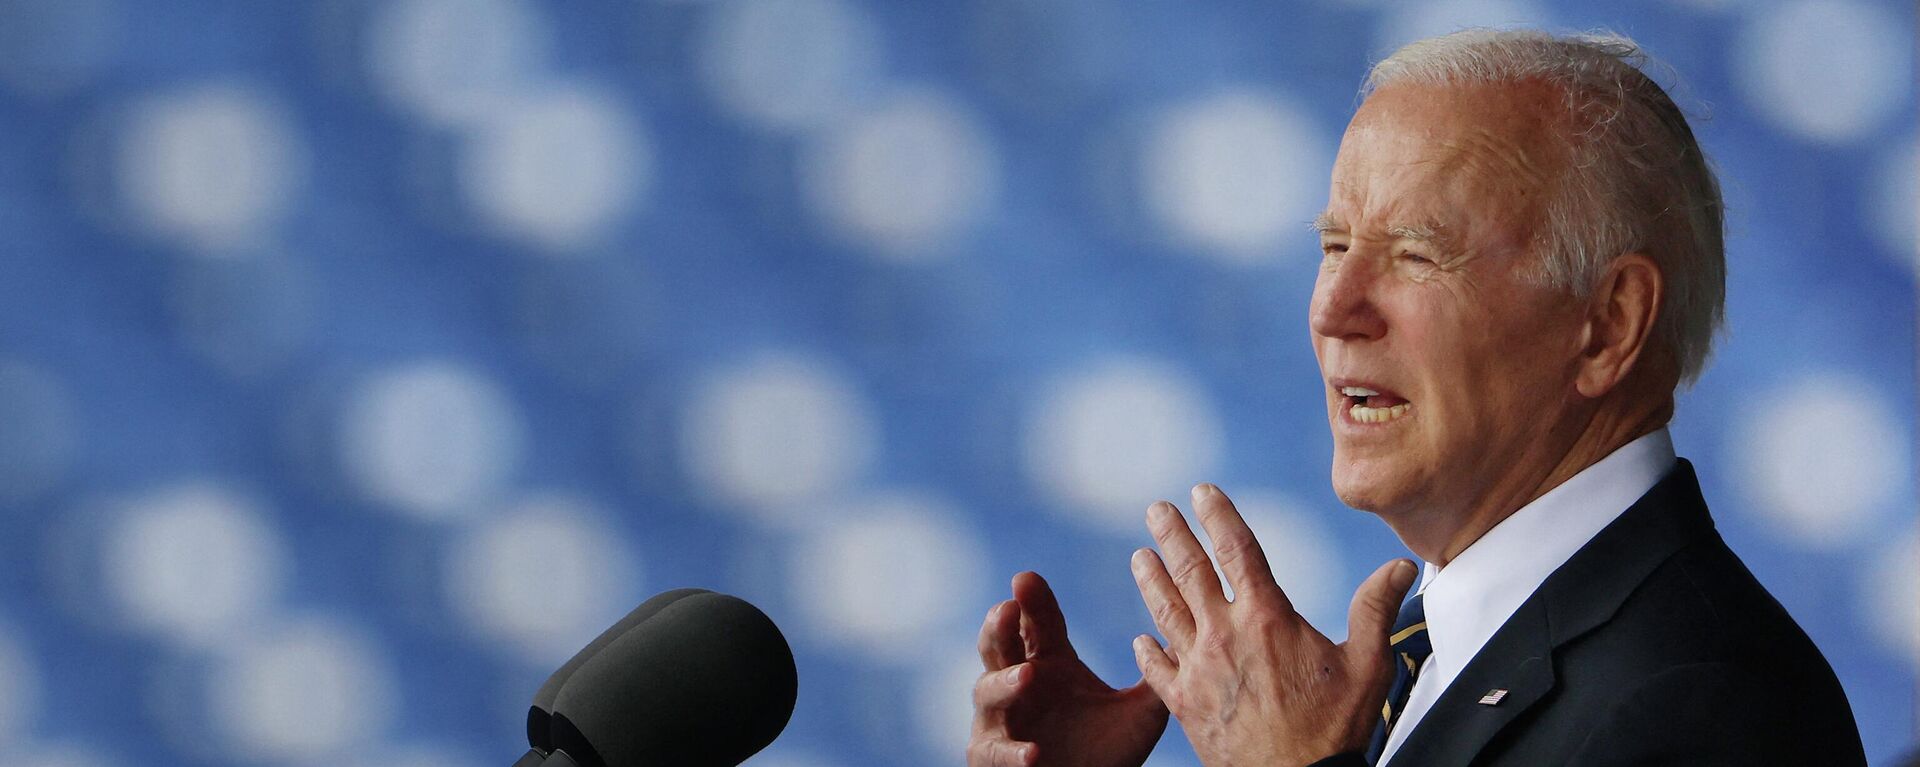  U.S. President Joe Biden delivers the commencement address during the graduation and commissioning ceremony at the U.S. Naval Academy Memorial Stadium on May 27, 2022 in Annapolis, Maryland. - Sputnik International, 1920, 03.06.2022